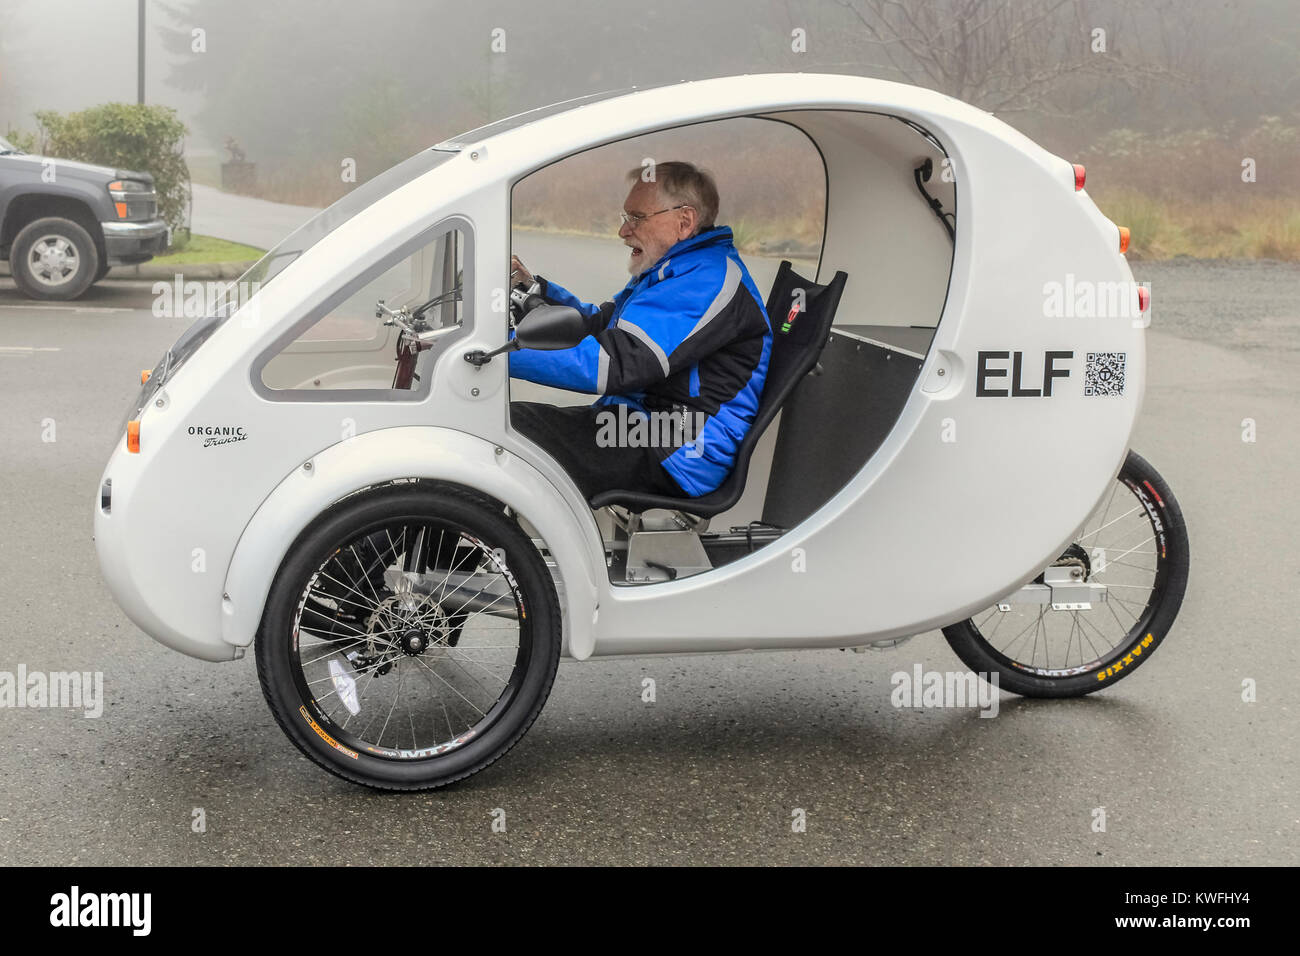 On a misty winter day, an elderly man (age 94) in a blue jacket takes his first ride in his new white pedal-powered/electric ELF tricycle. Stock Photo